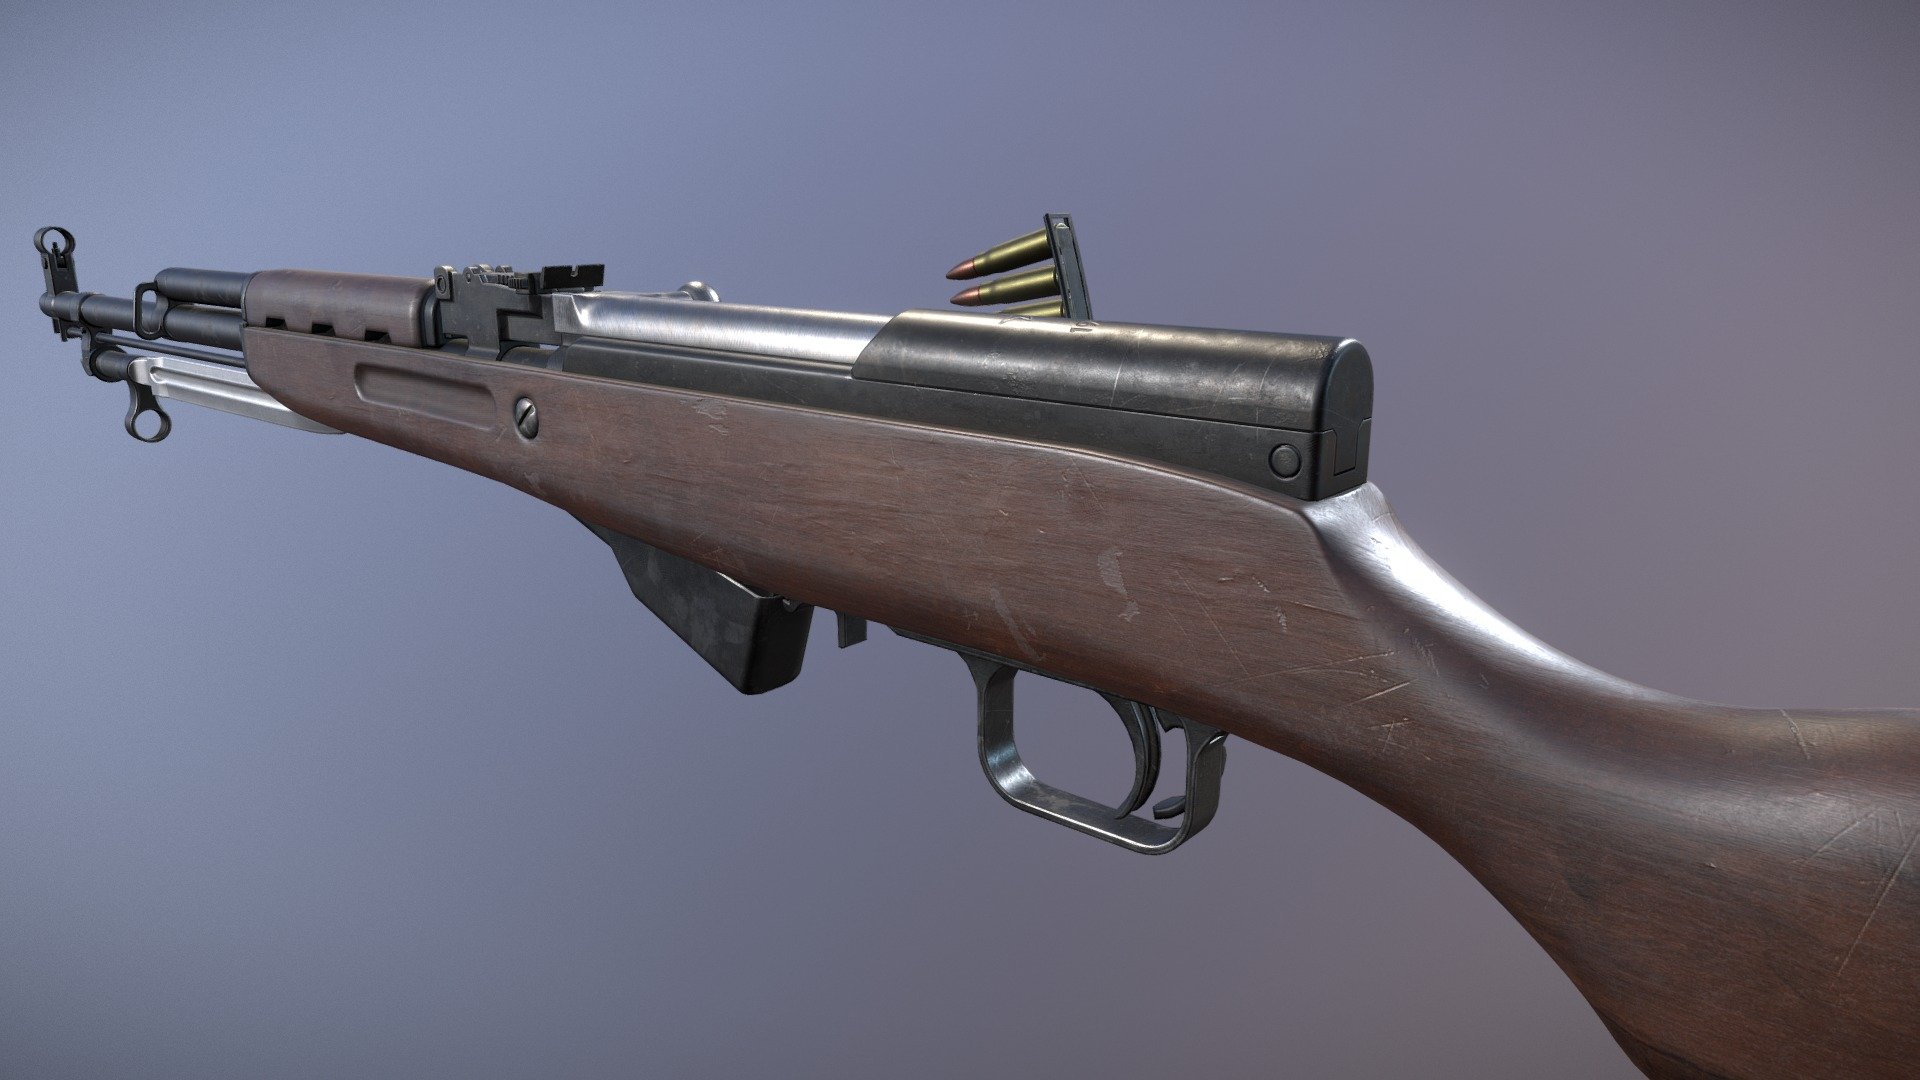 Game-ready Russian SKS Rifle

Originally modeled in 3ds Max 2018. Download includes .max, .fbx, .obj, metal/roughness PBR textures, specular/gloss PBR textures, textures for Unity and Unreal Engines, and additional texture maps such as curvature, AO, and color ID.

Model ready for animation. Movable parts include:
* bayonet
* bolt carrier
* magazine cover
* trigger
* stripper clip and cartridges

Approximate dimensions: 102cm x 5cm x 18cm

Model is triangulated, no n-gons. A quaded version is included in the download. 7.62x39mm cartridge and 10 round stripper clip included 3d model